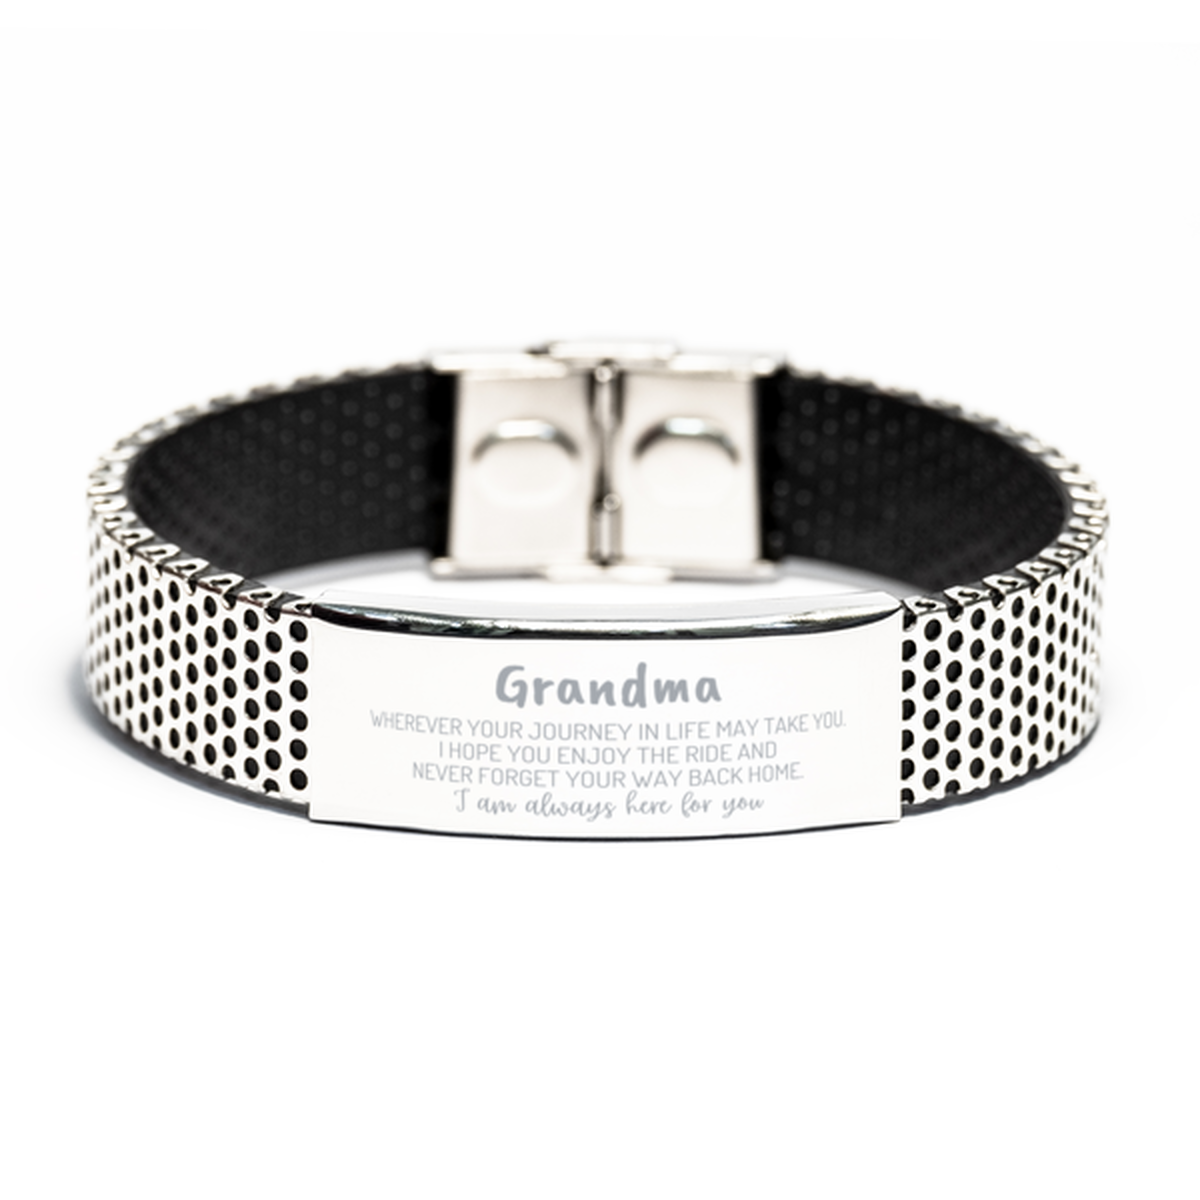 Grandma wherever your journey in life may take you, I am always here for you Grandma Stainless Steel Bracelet, Awesome Christmas Gifts For Grandma, Grandma Birthday Gifts for Men Women Family Loved One